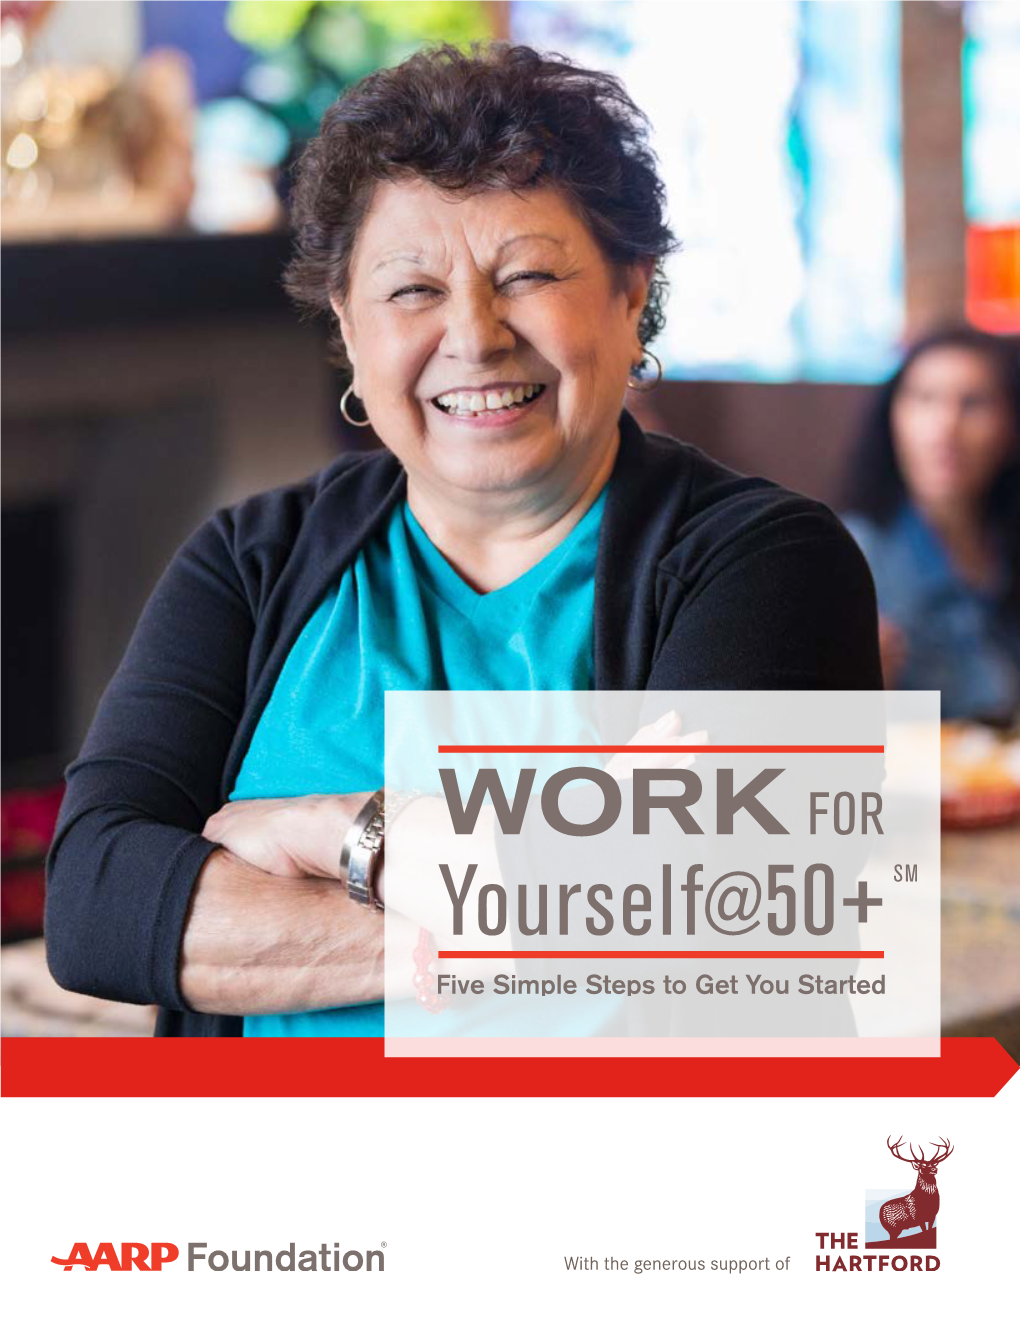 Work for Yourself@50+ Materials